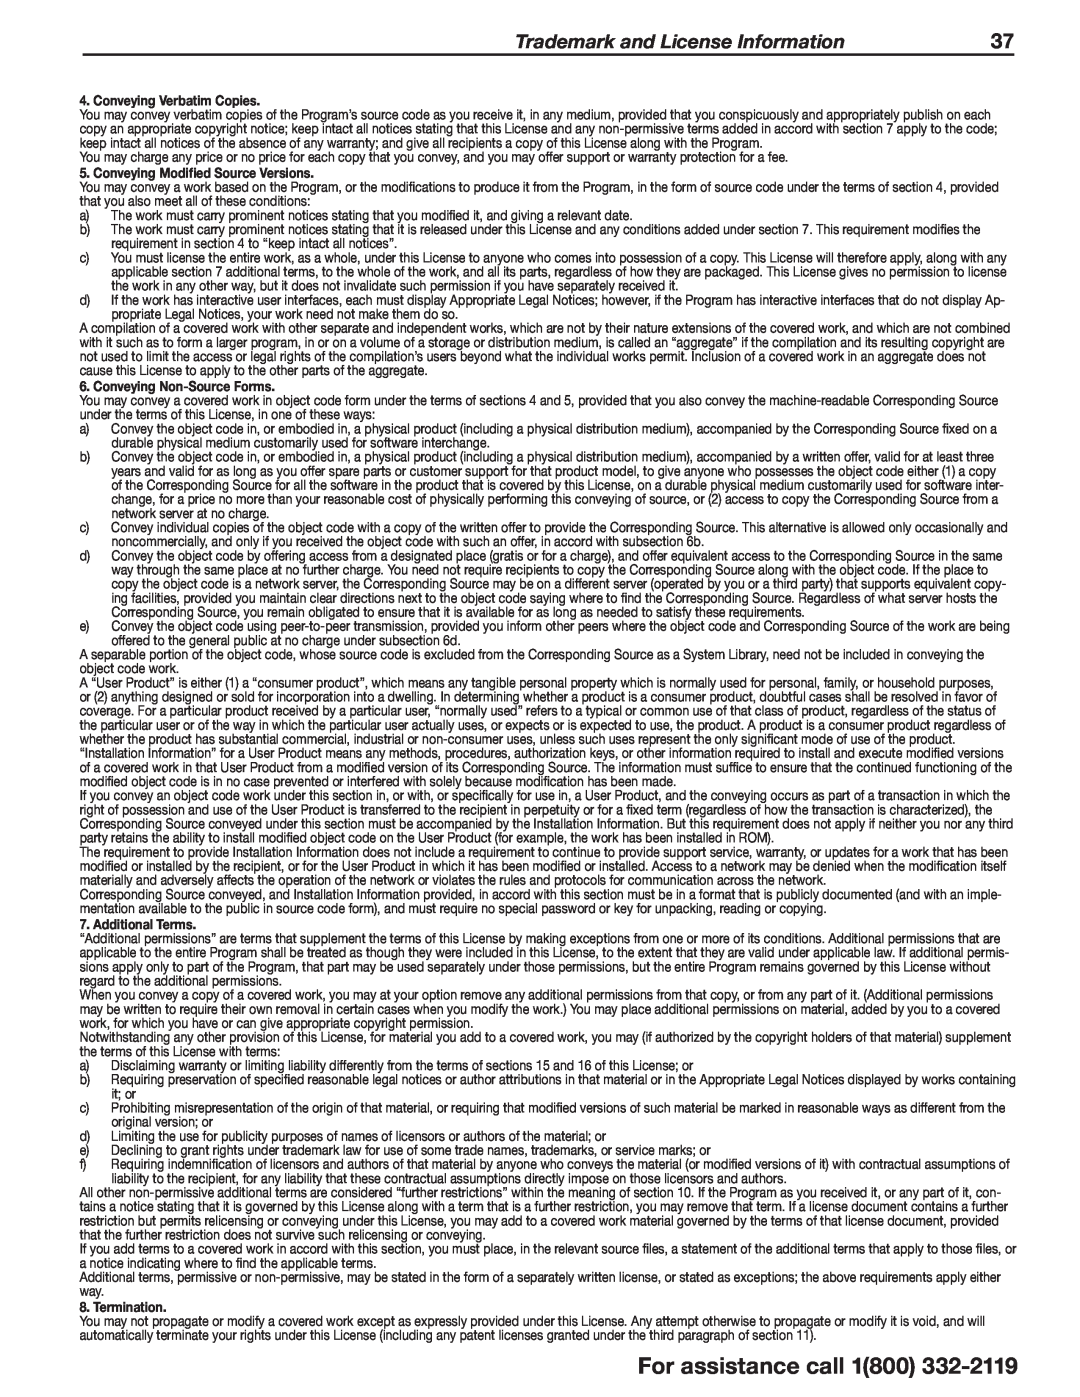 Mitsubishi Electronics WD-73C11 manual For assistance call, Trademark and License Information, Conveying Verbatim Copies 